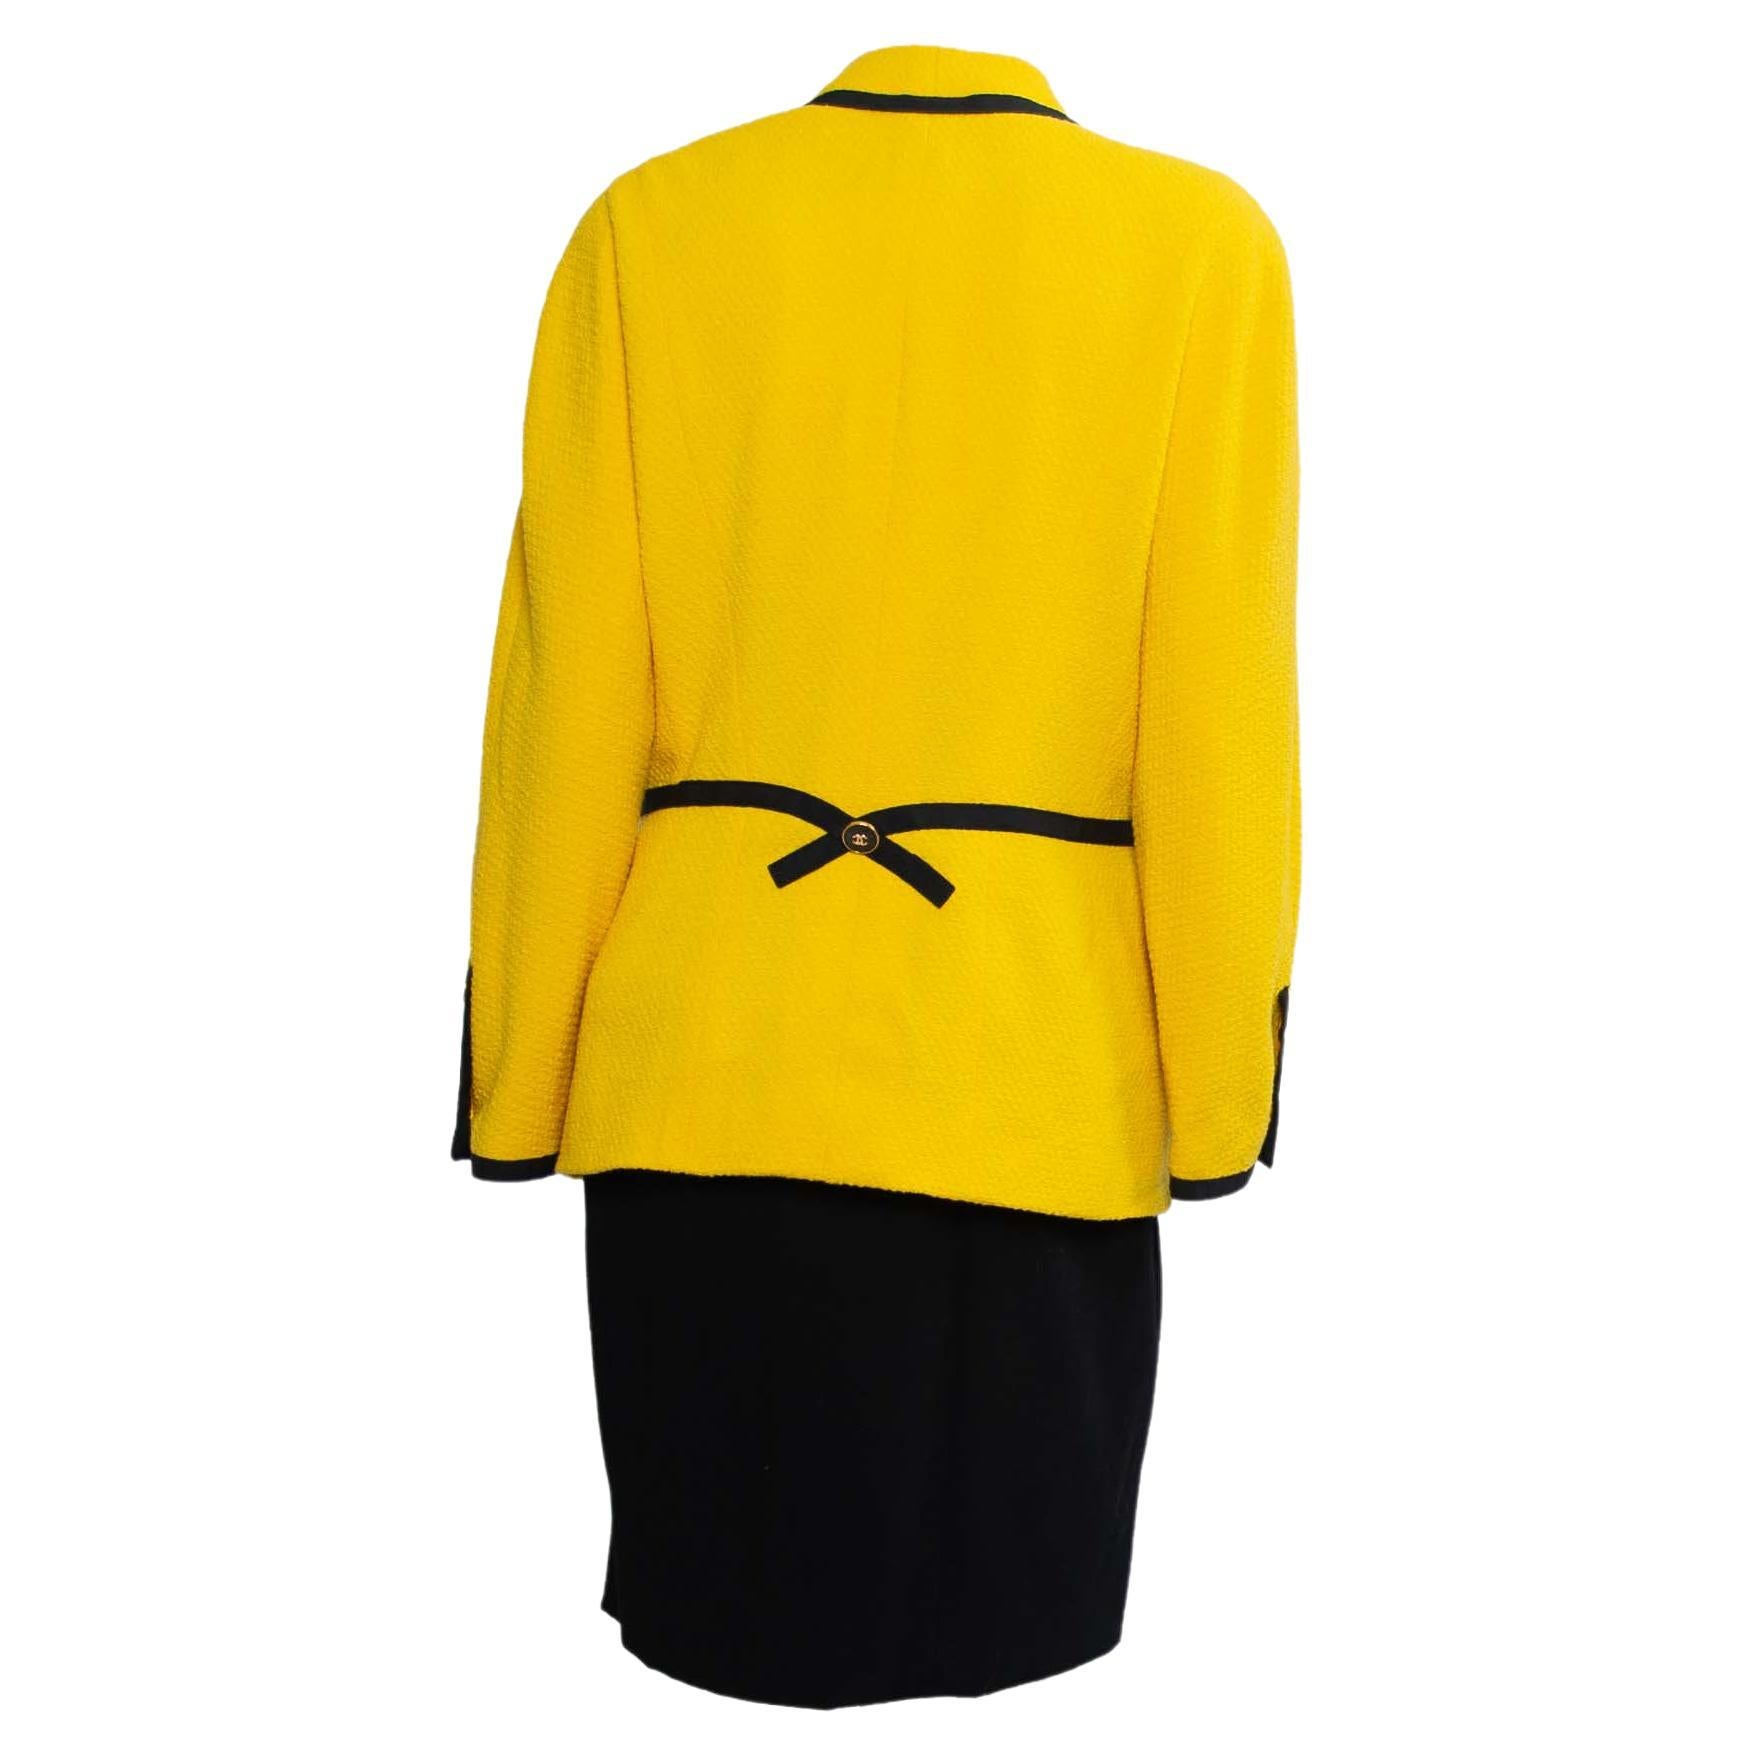 S/S 1991 Chanel by Karl Lagerfeld Canary Yellow Skirt Suit Documented In Good Condition For Sale In West Hollywood, CA